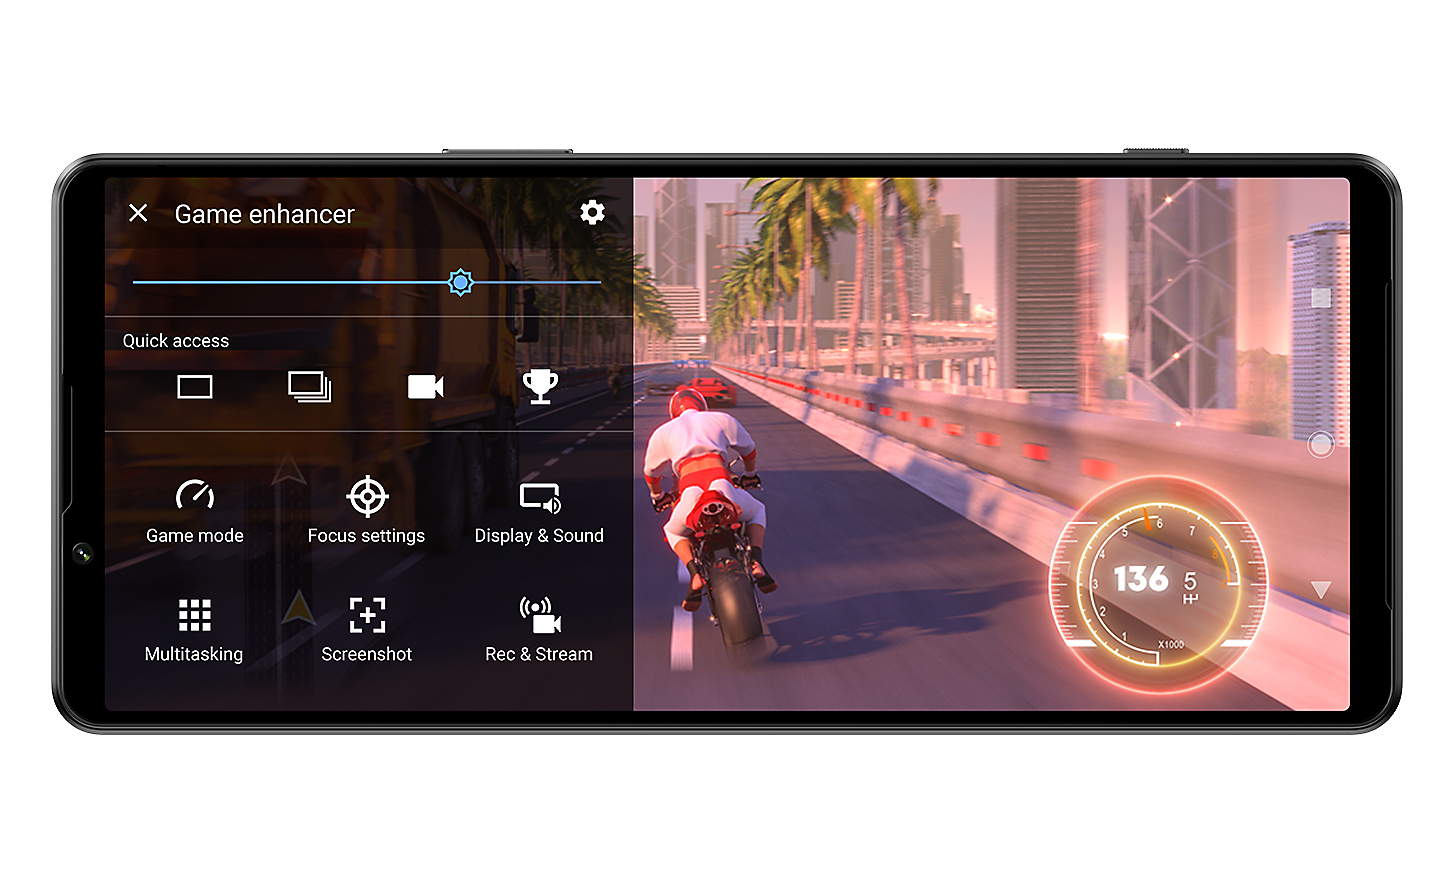 Xperia 1 IV in landscape position displaying the Game enhancer interface